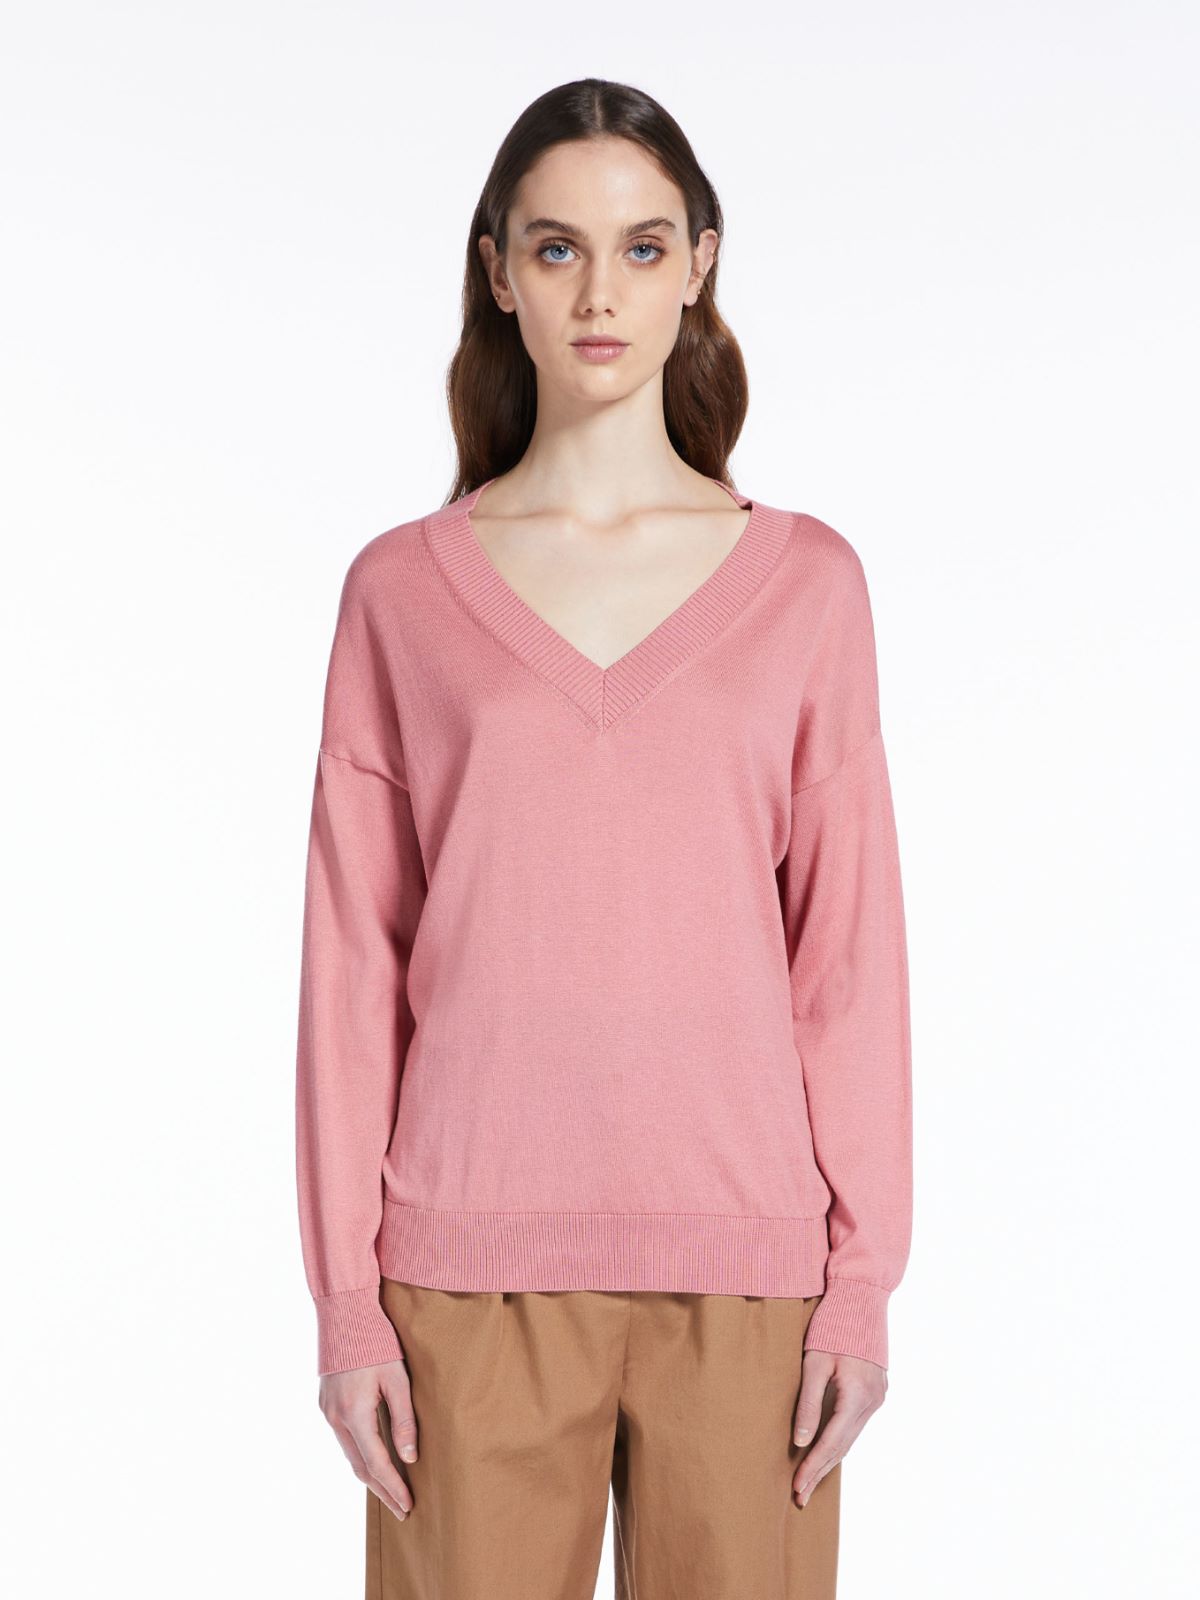 Cotton and silk yarn sweater - ANTIQUE ROSE - Weekend Max Mara - 2